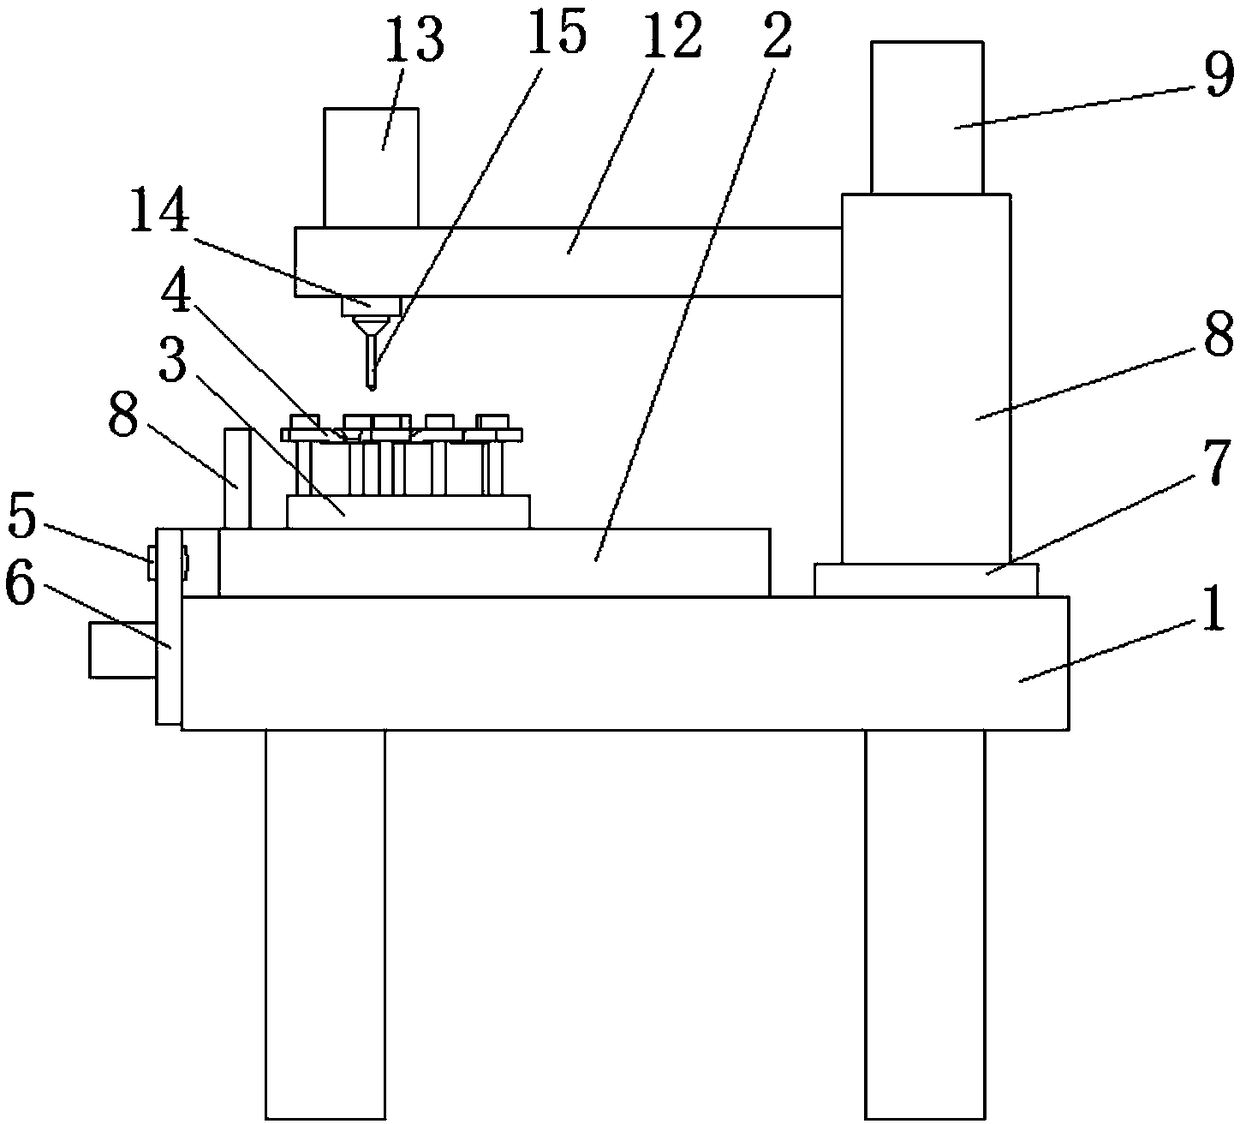 Clamp for processing holes